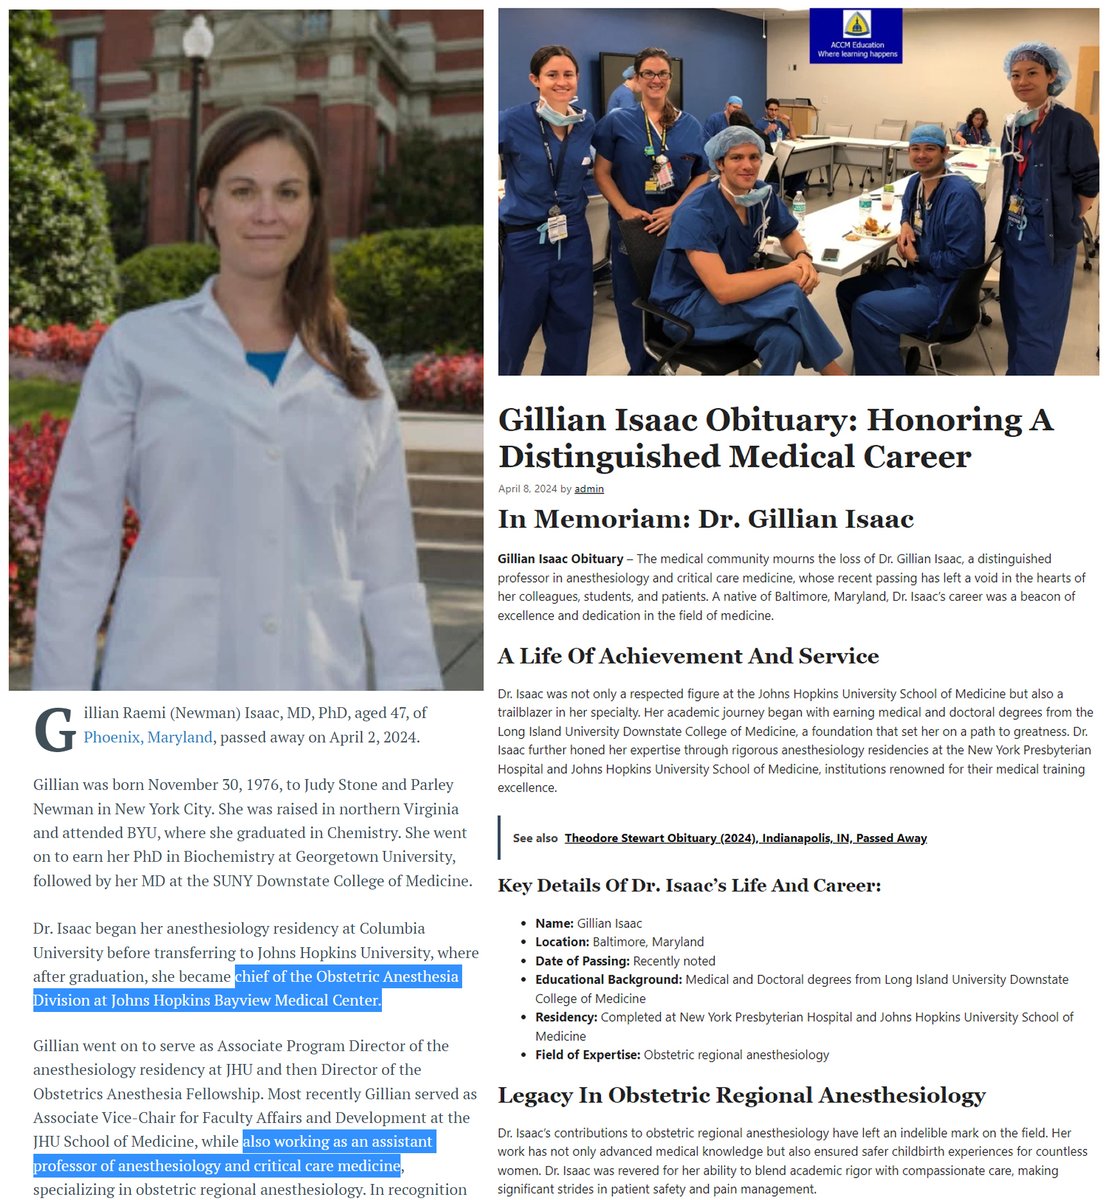 US DOCTOR DEAD - 47 year old Dr.Gillian Isaac MD PhD, of Phoenix MD, died suddenly on April 2, 2024.

She was Chief of Obstetric Anesthesia Division at Johns Hopkins Bayview Medical Center, and assistant professor of anesthesiology and critical care medicine

COVID-19 mRNA